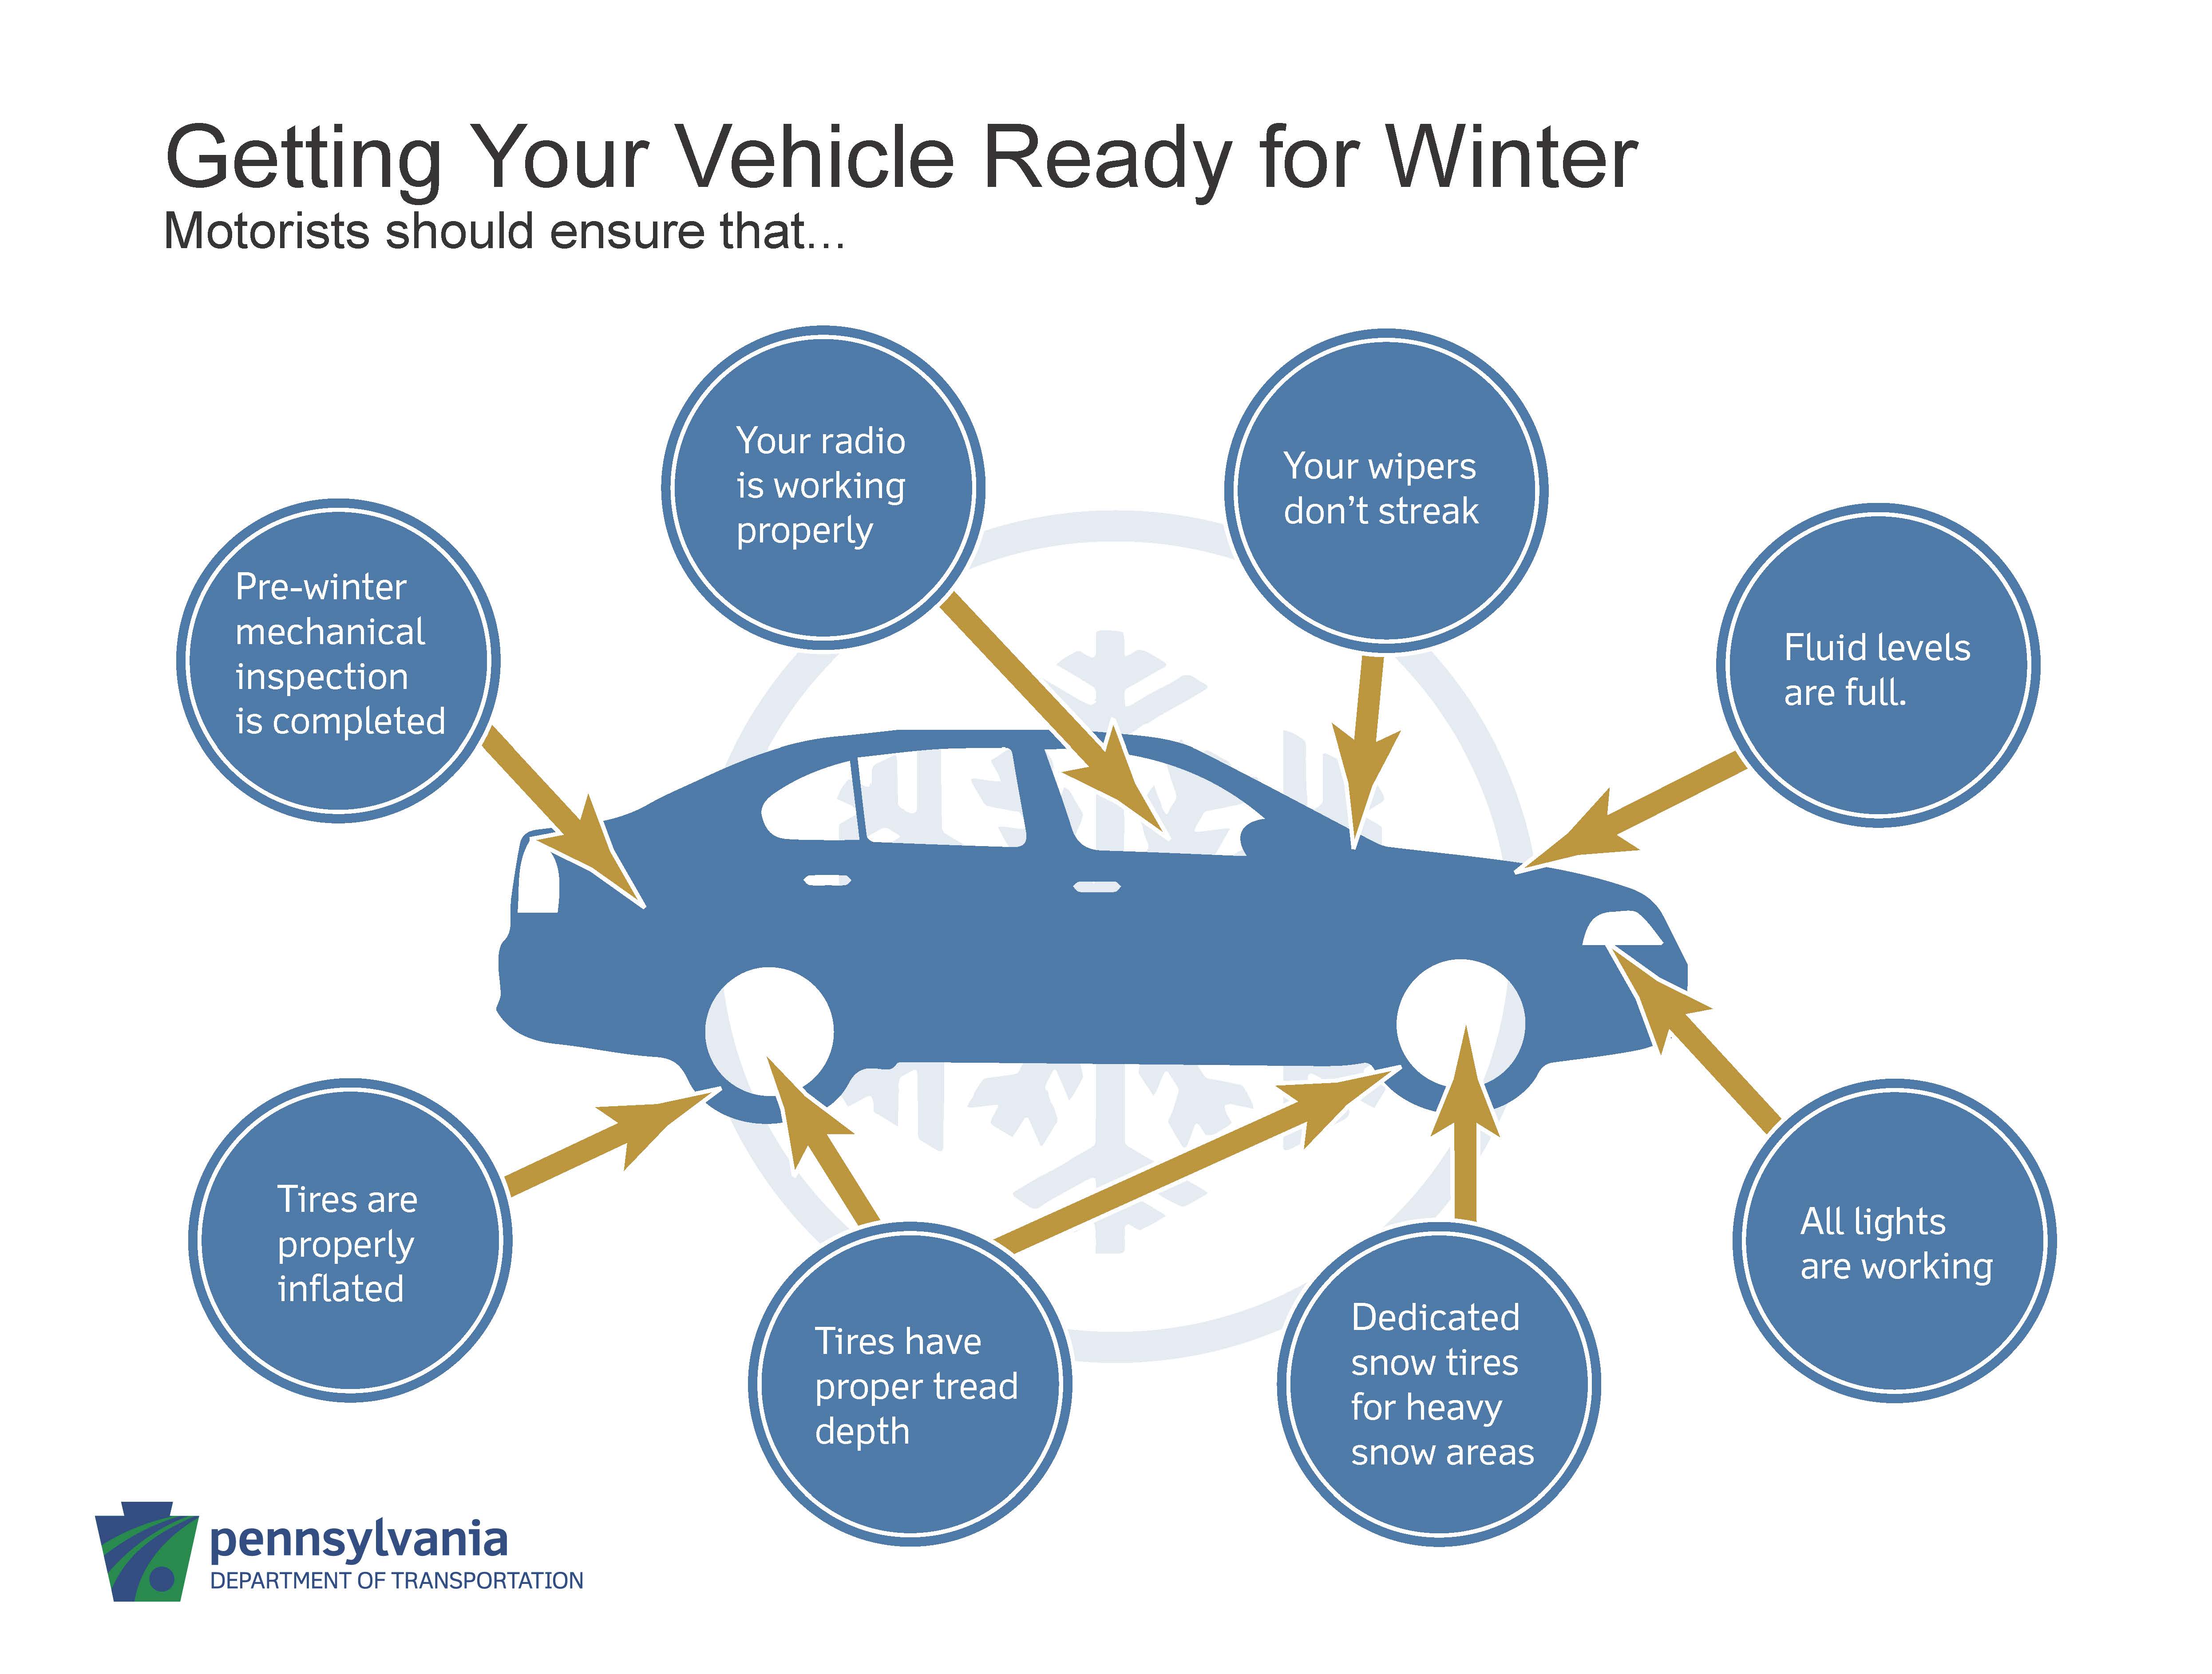 Illustrated car with arrows and text pointing to the various parts of a vehicle that should be checked for winter.